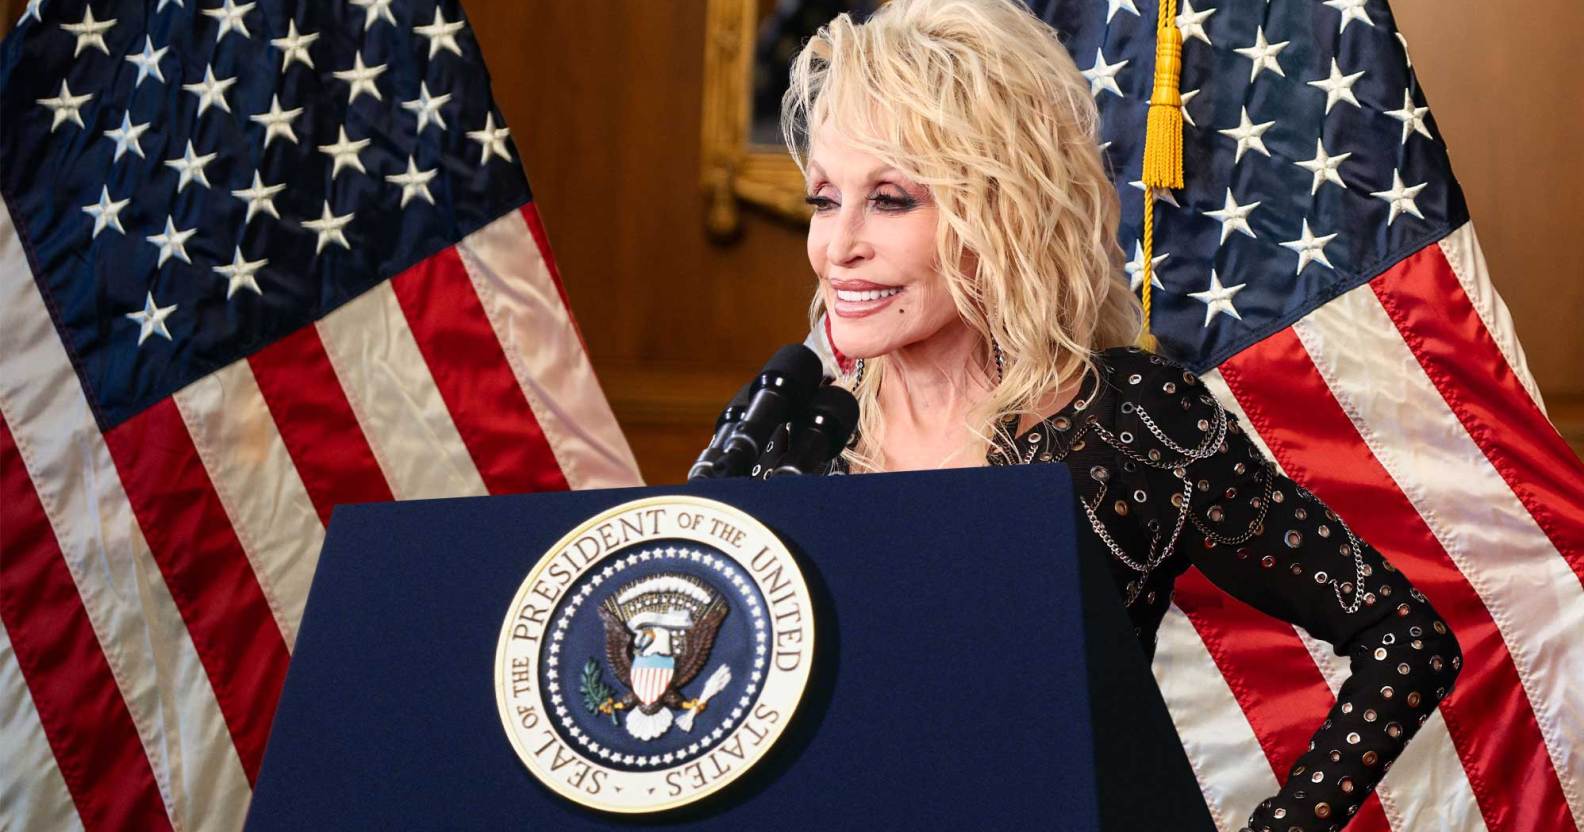 Dolly Parton behind a podium with the presidential seal. The US flag hangs behind her